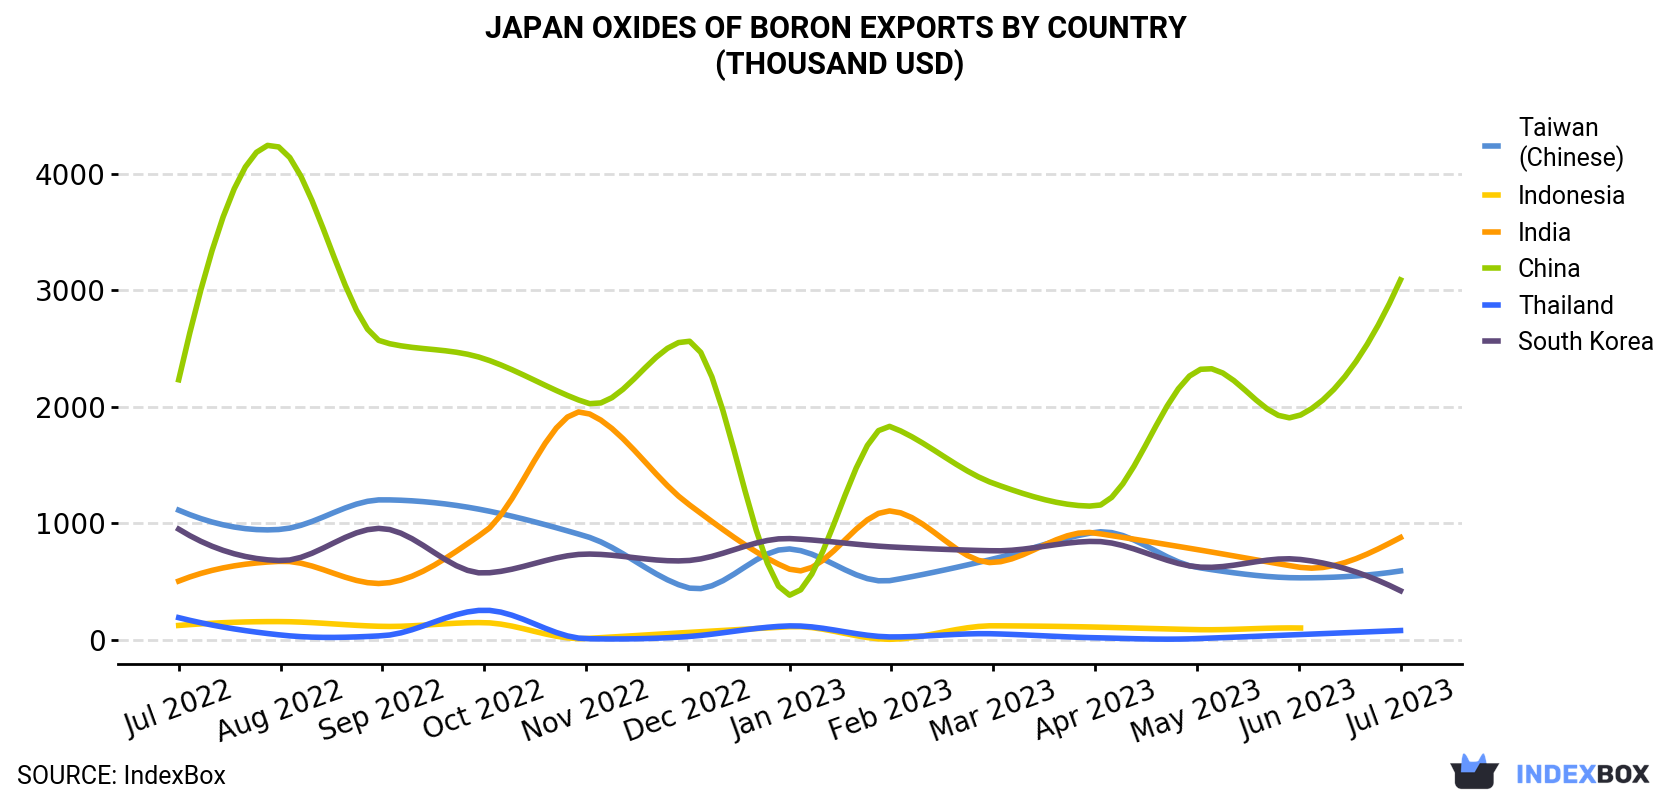 Japan Oxides Of Boron Exports By Country (Thousand USD)